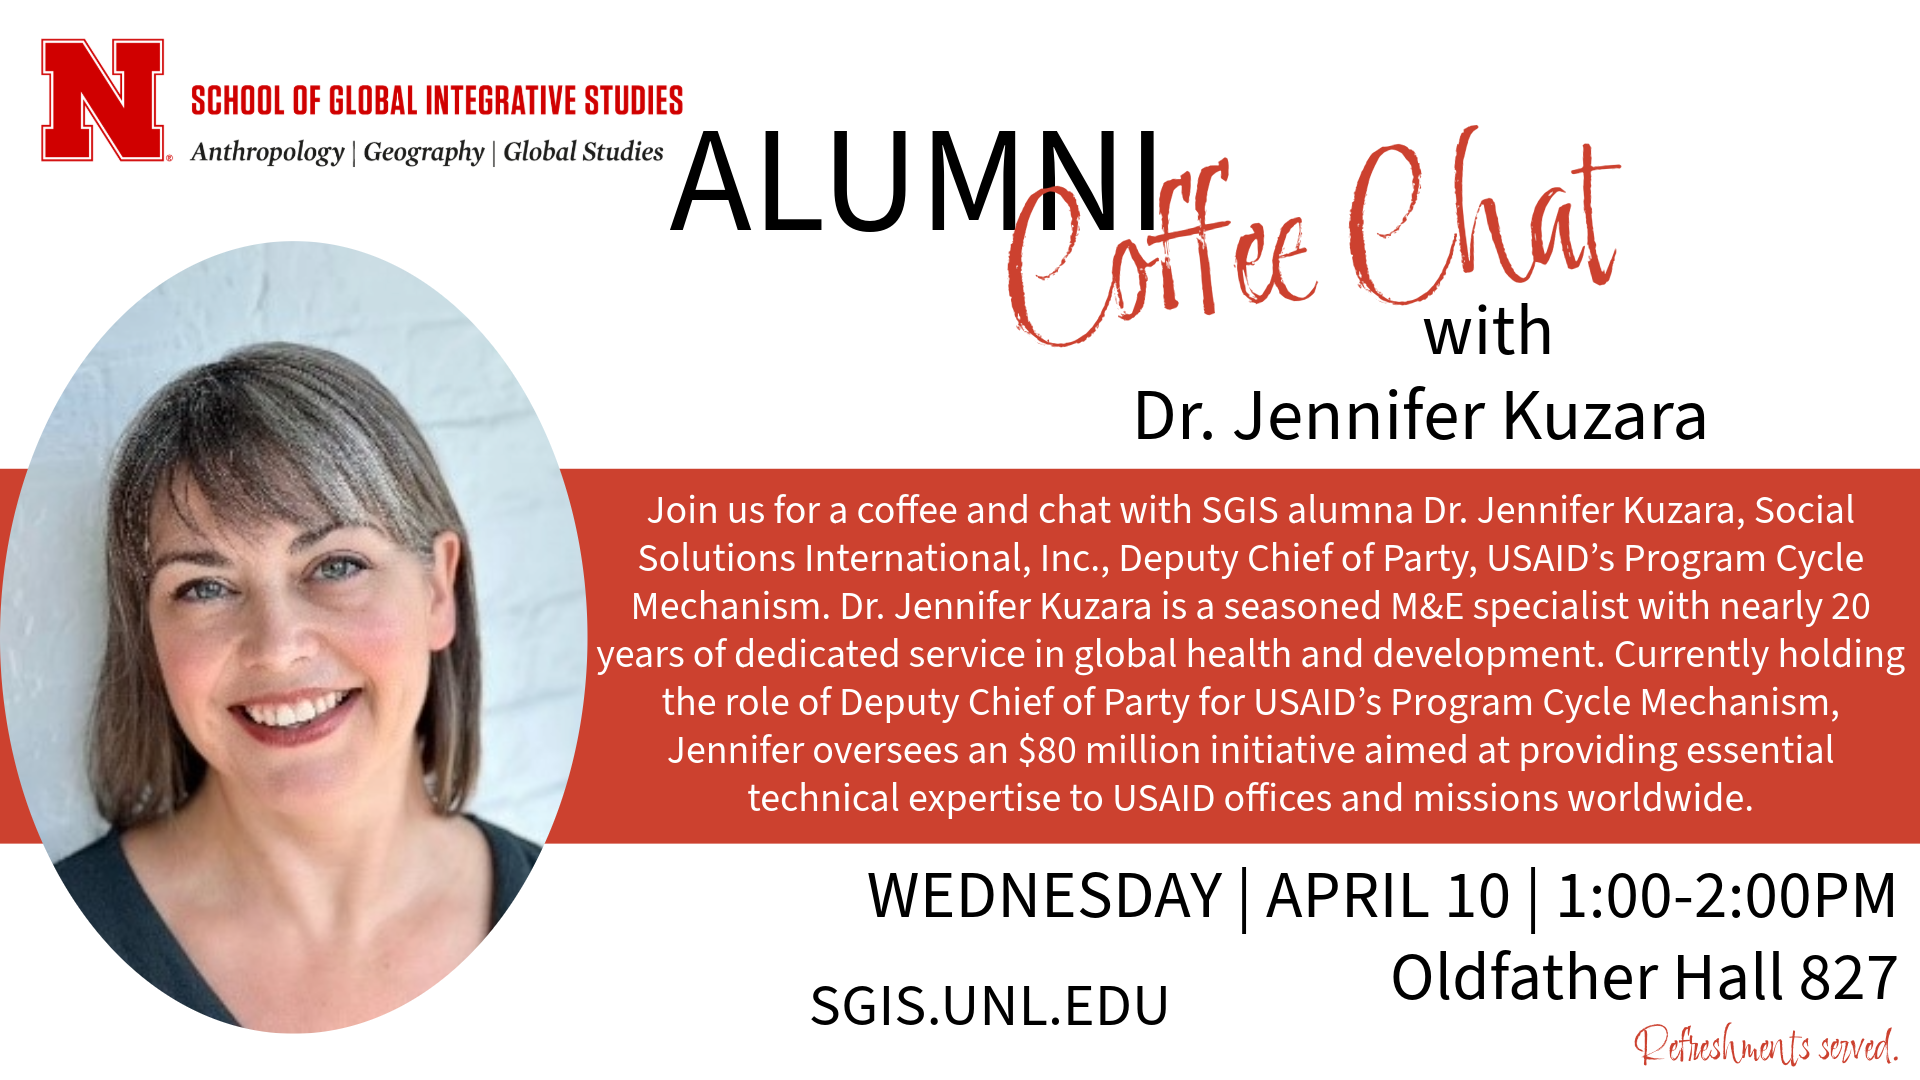 SGIS Alumni Coffee Chat Wednesday 4.10 at 1PM